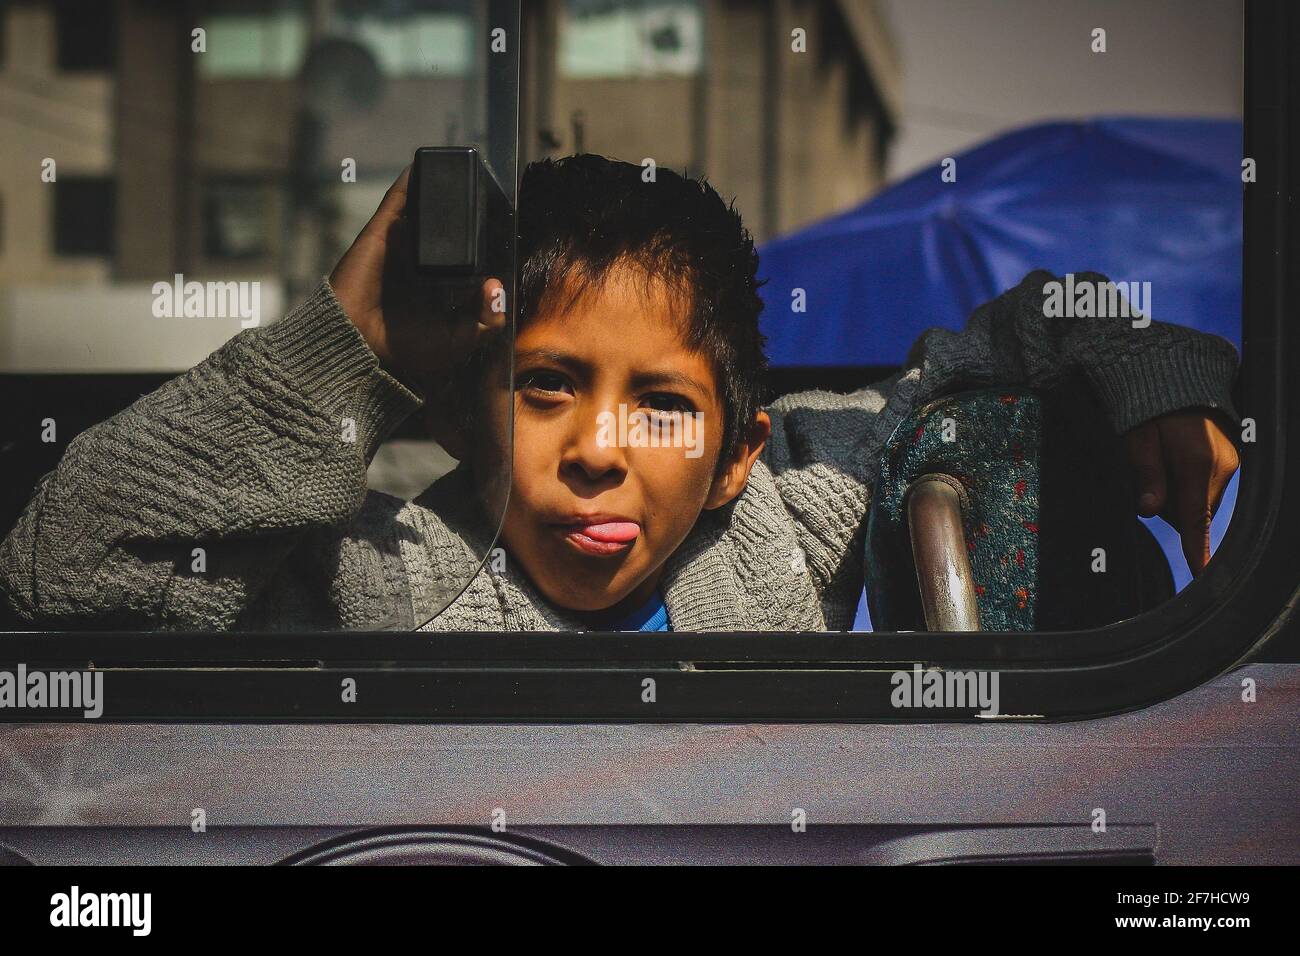 MEXICO CITY, MEXICO, 21.1.2012: Mexican kid showing his toungue from a local bus in the city. Nosy kid showing his tongue Stock Photo